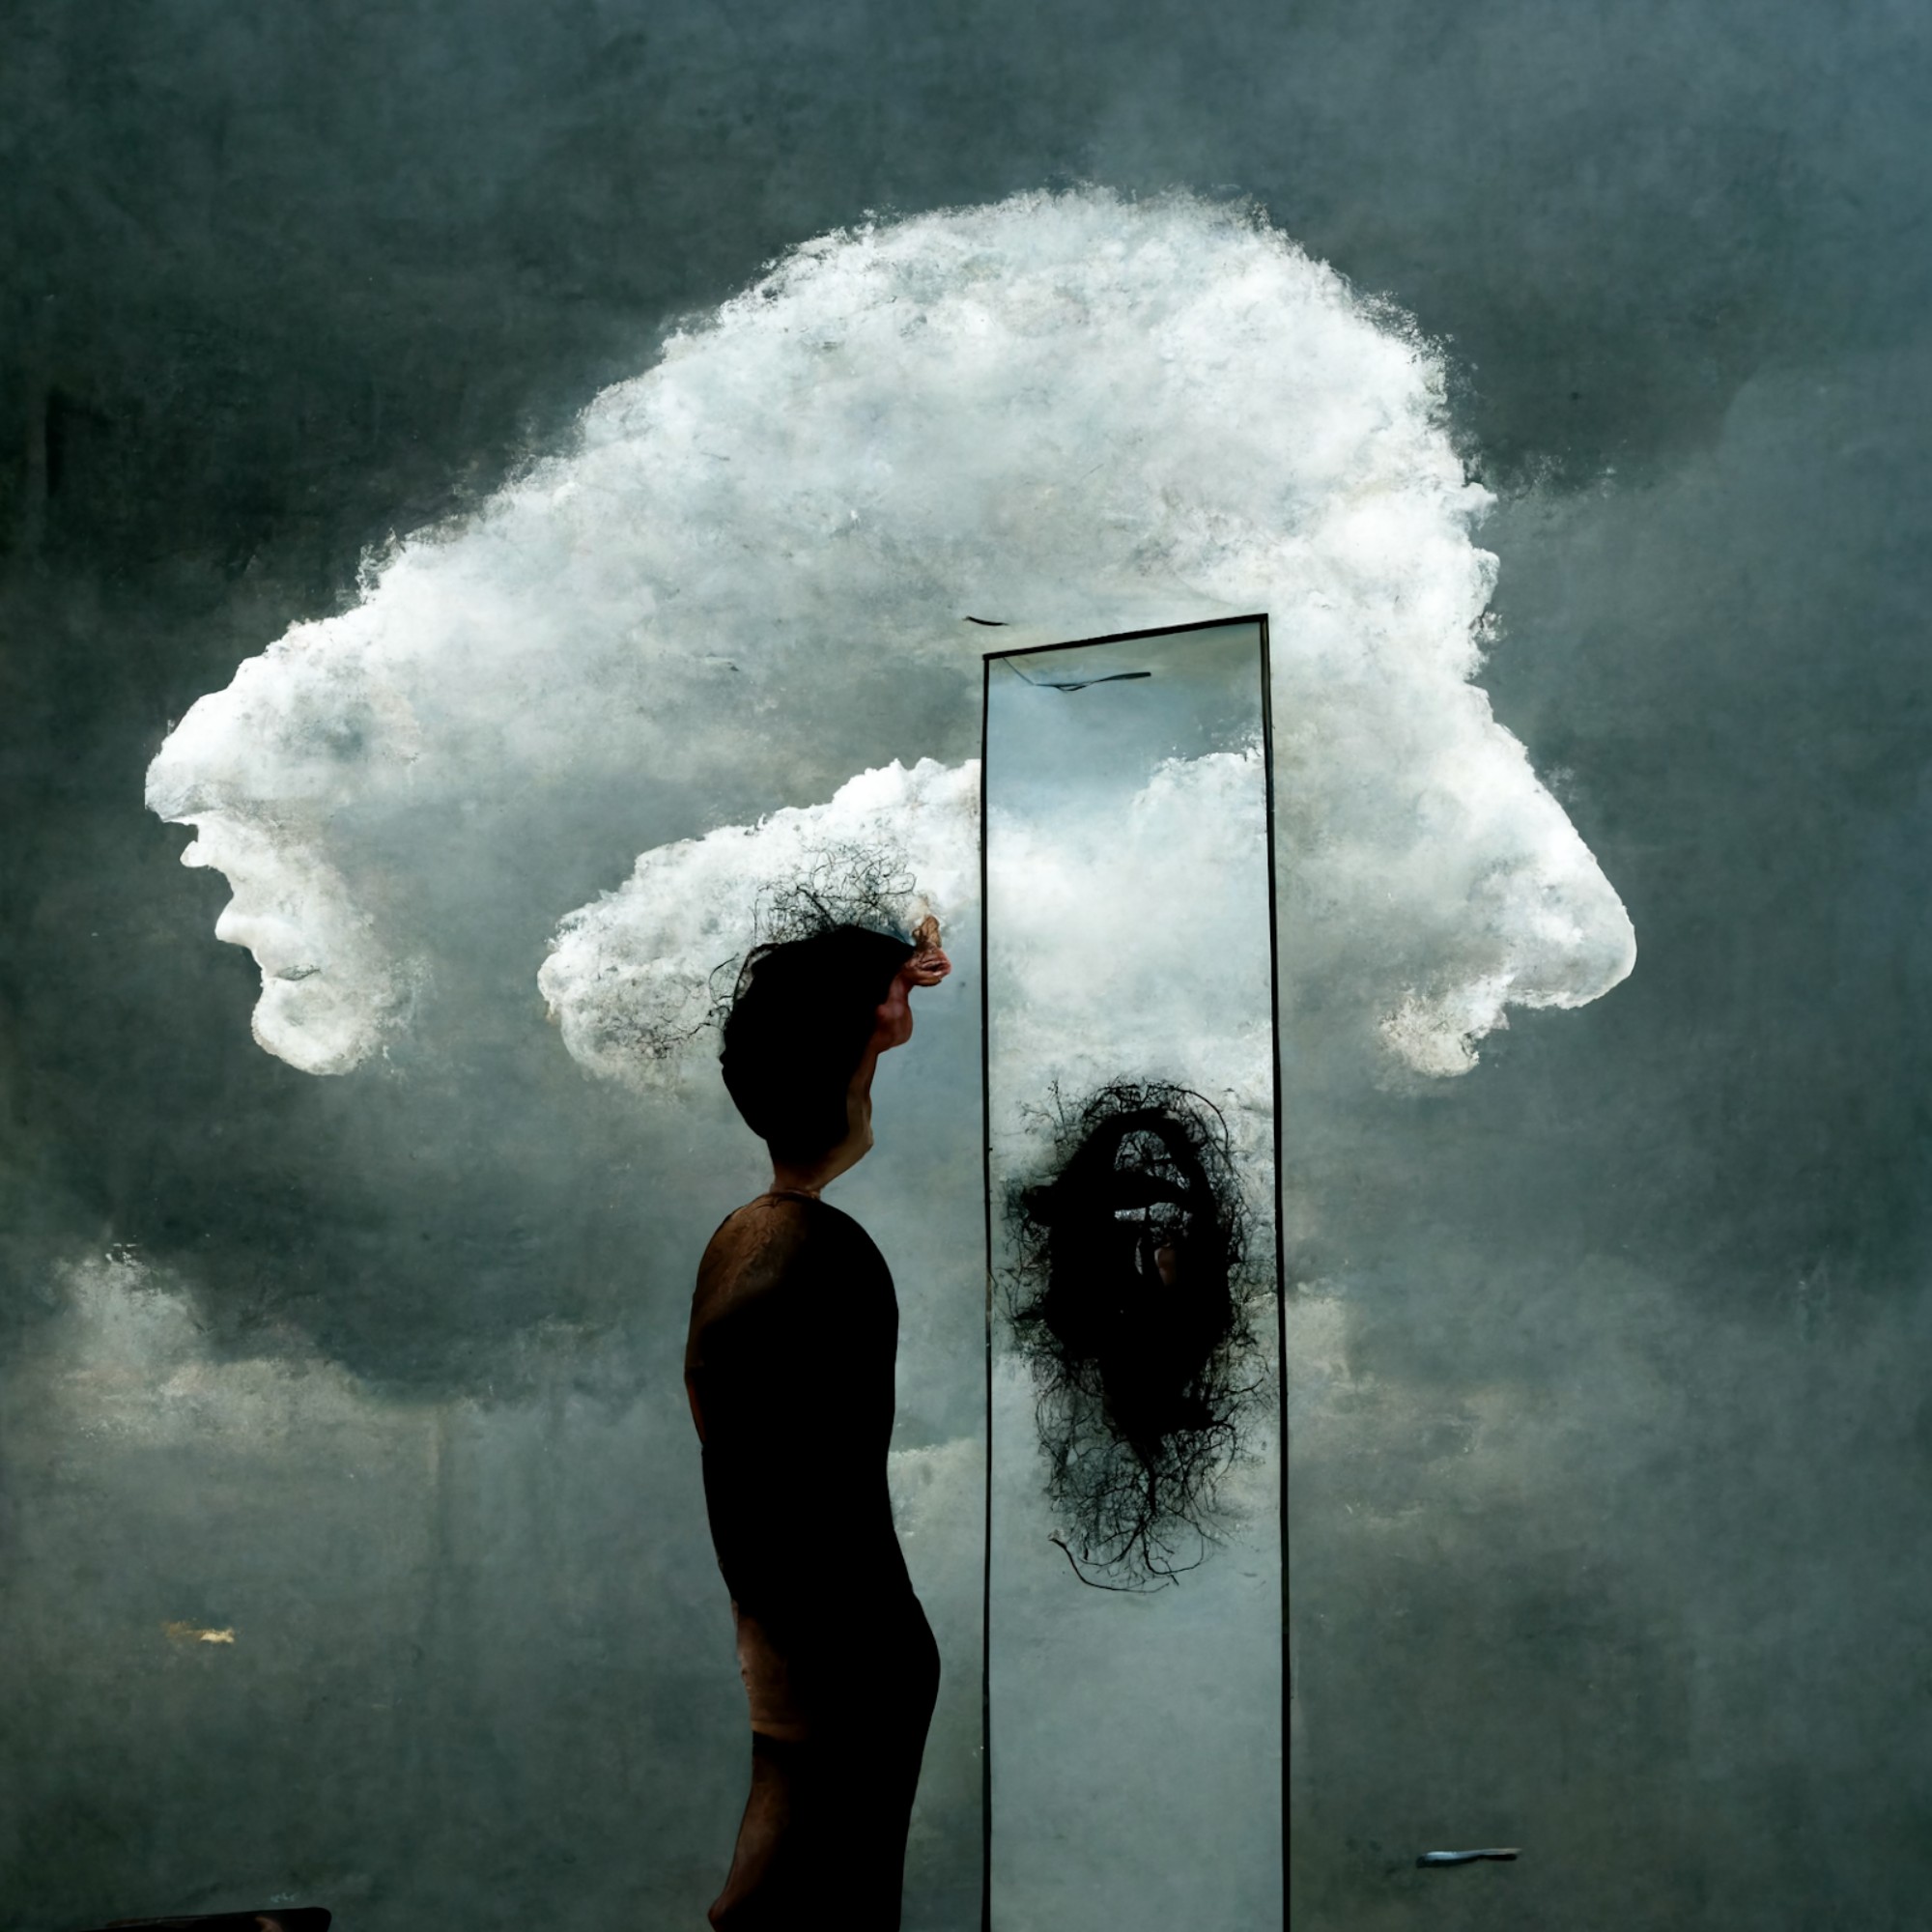 Person looking into a mirror, against the background of clouds